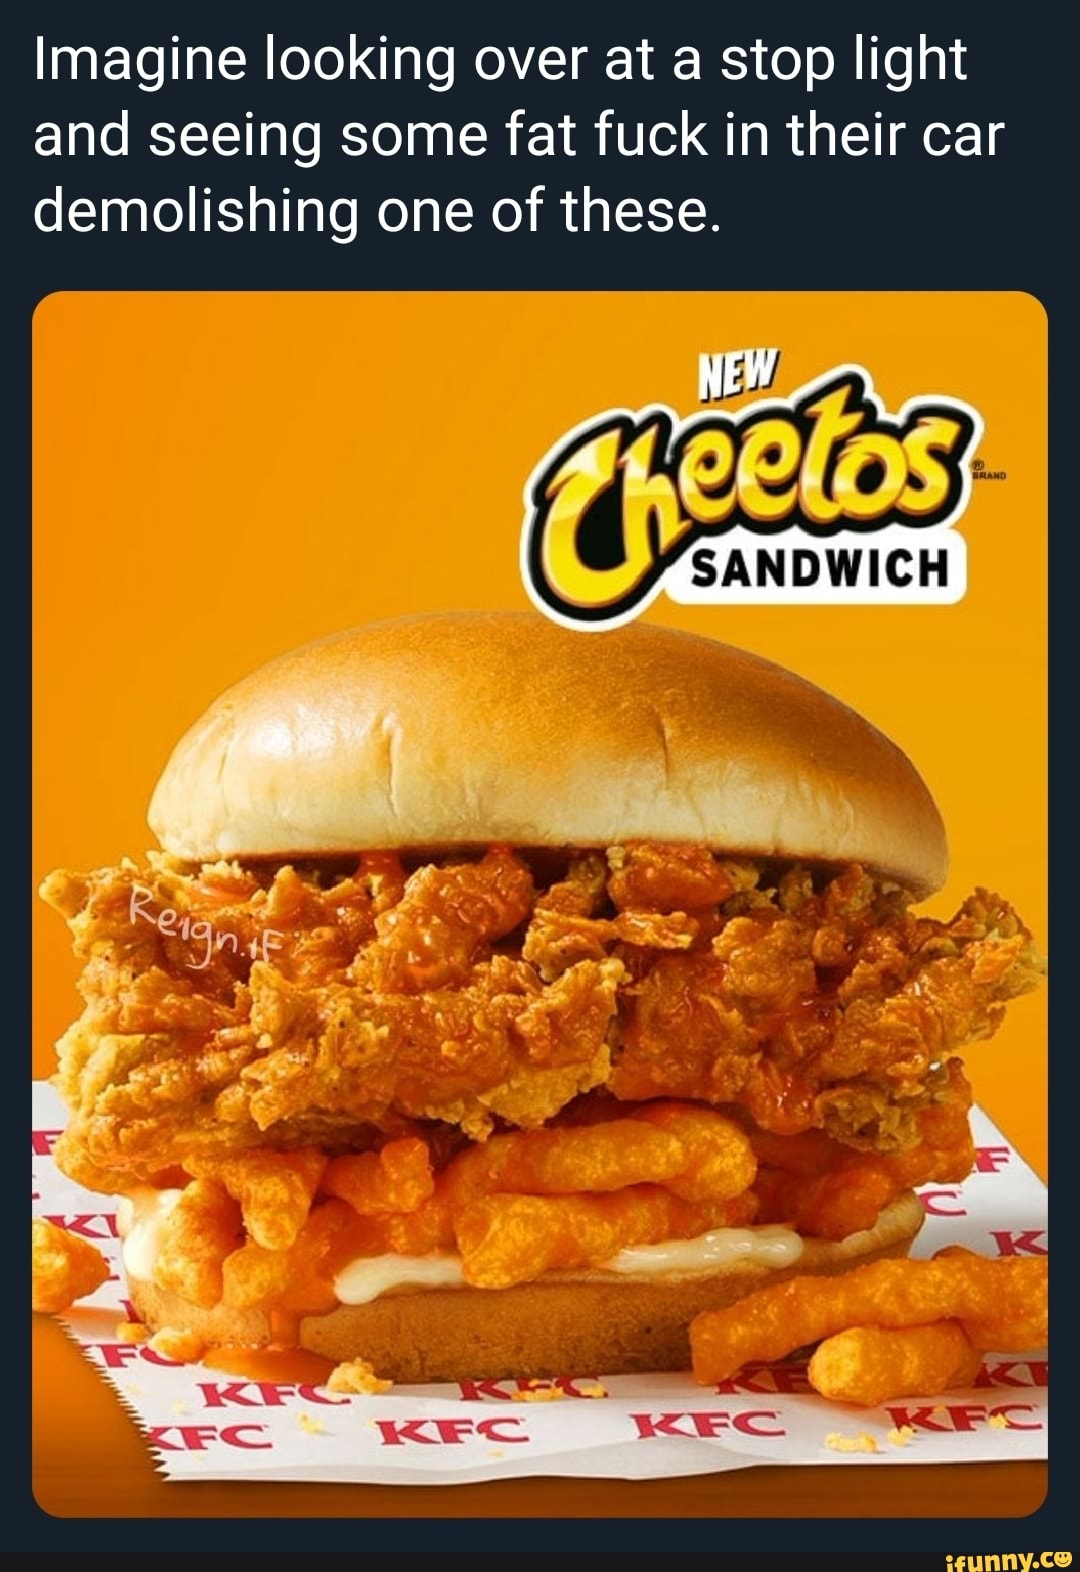 kfc cheetos sandwich calories - Imagine looking over at a stop light and seeing some fat fuck in their car demolishing one of these. New Irand Sandwich Reignih Kf Kec Kfc Kfc ifunny.co